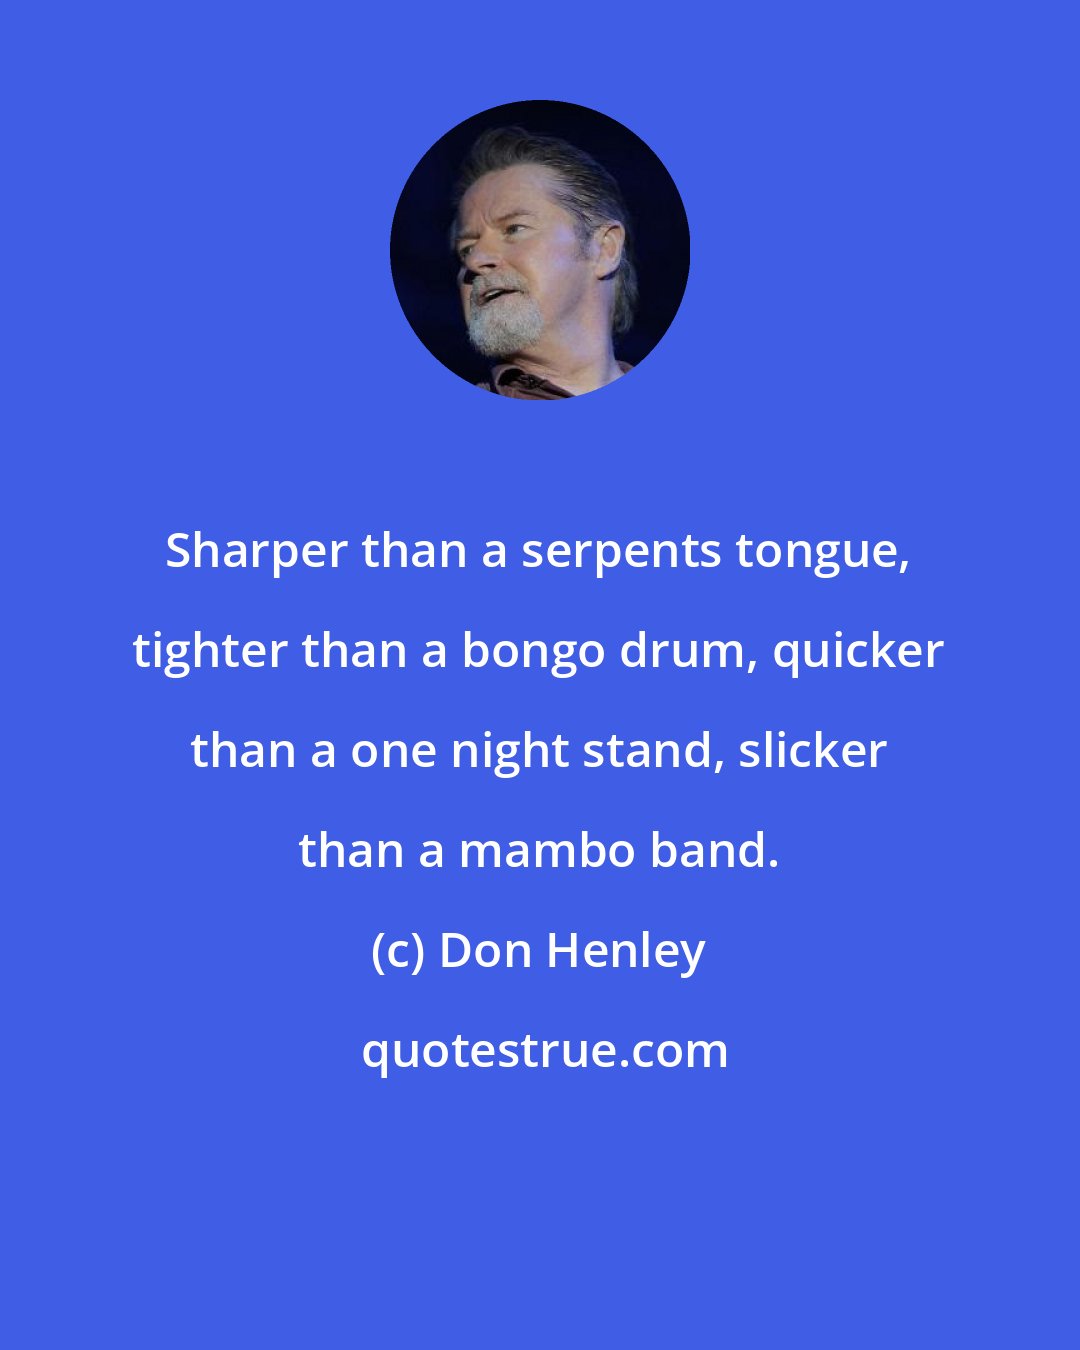 Don Henley: Sharper than a serpents tongue, tighter than a bongo drum, quicker than a one night stand, slicker than a mambo band.